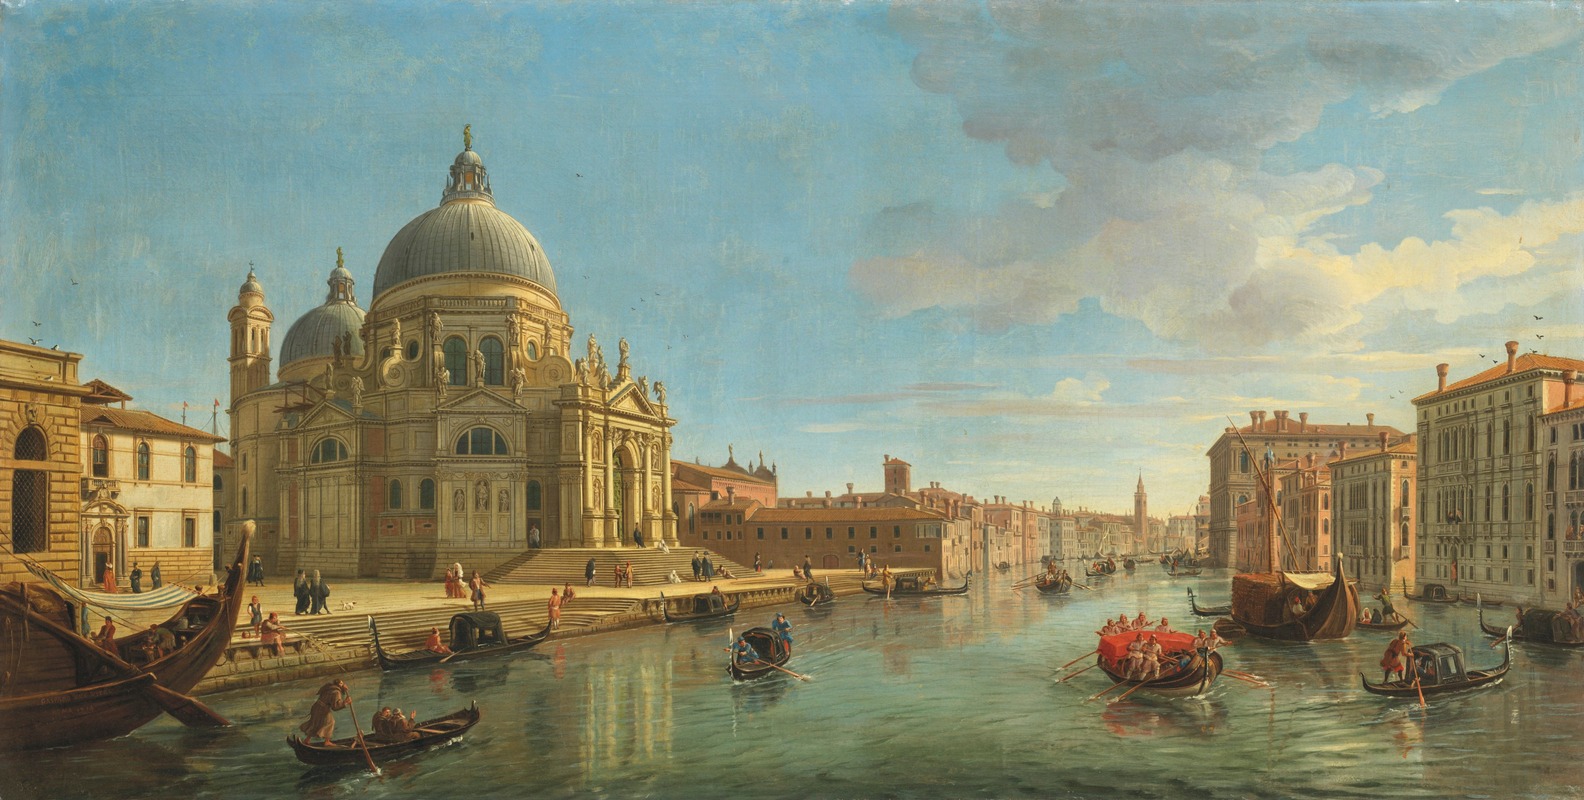 Gaspar Van Wittel - View of Santa Maria della Salute, Venice, from the entrance of the Grand Canal